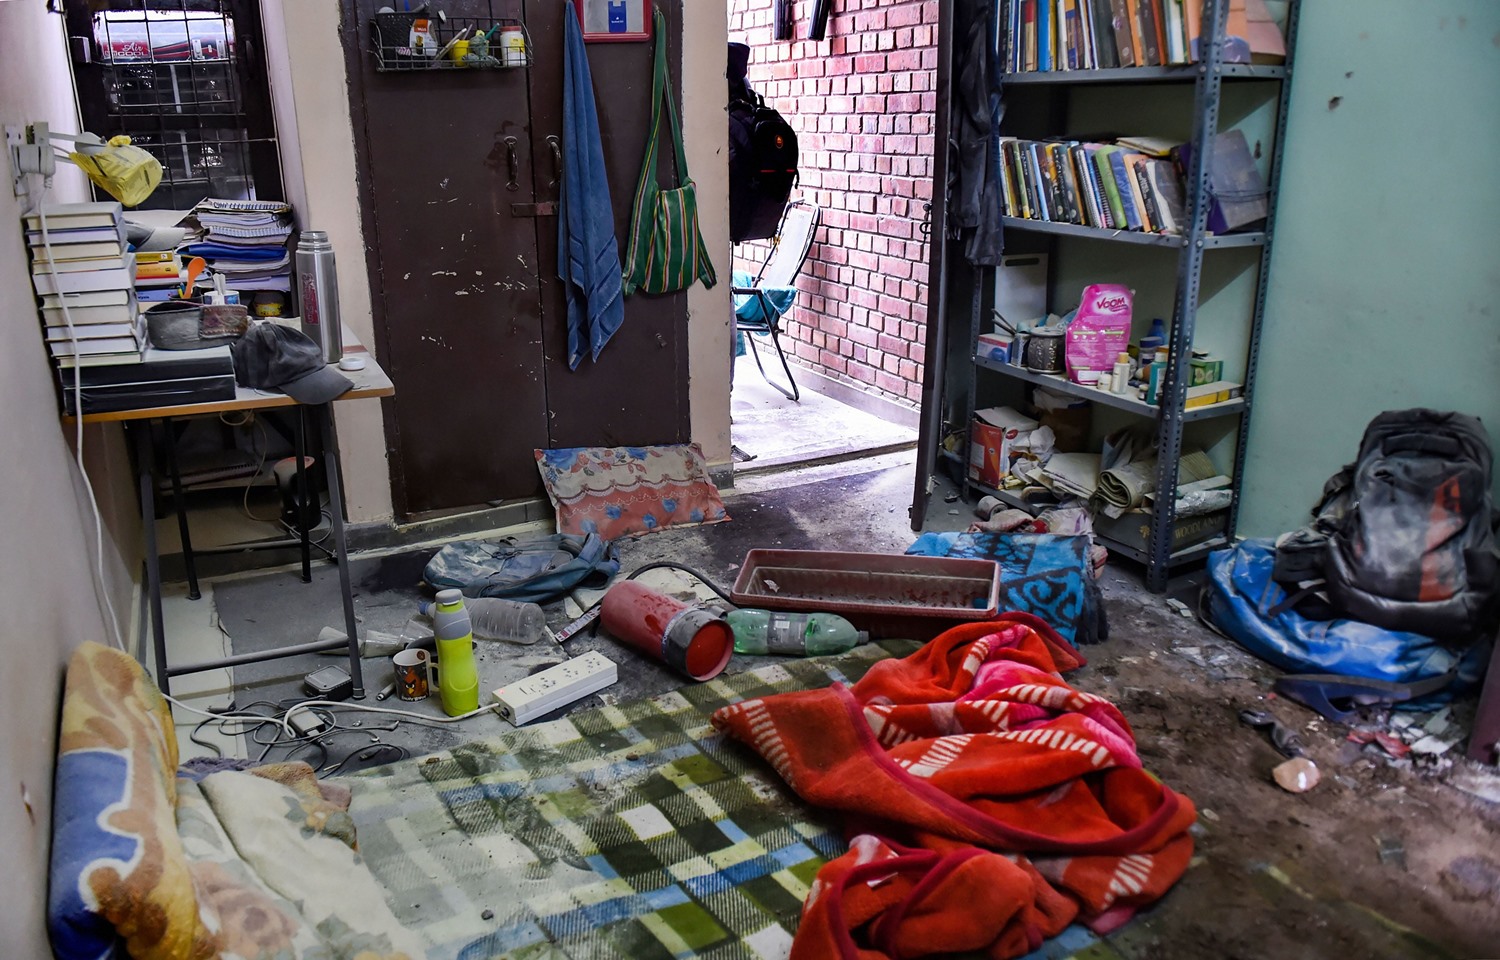 New Delhi: Articles scattered in a room of the Sabarmati Hostel following Sunday's violence at the Jawaharlal Nehru University (JNU) , in New Delhi, Monday, Jan. 6, 2020. A group of masked men and women armed with sticks, rods and acid allegedly unleashed violence on the campus of the University, Sunday evening. (PTI Photo/Atul Yadav) (PTI1_6_2020_000073B)